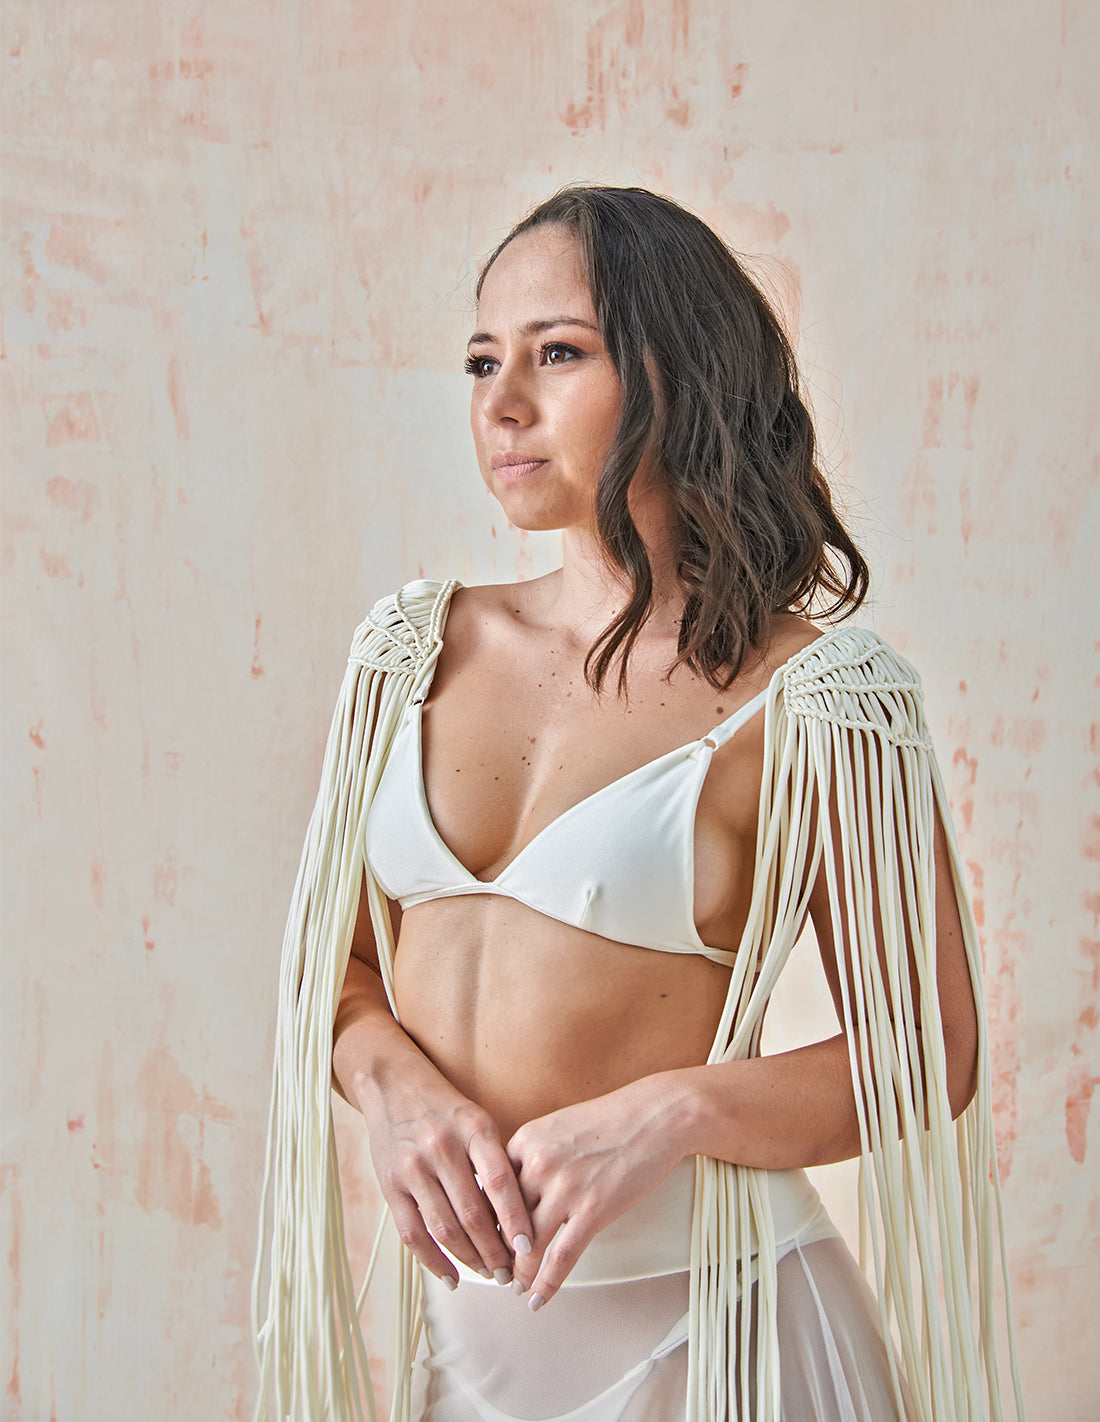 Flow Shoulder Pads Ivory. Shoulder Pads With Hand Woven Macramé In Ivory. Entreaguas